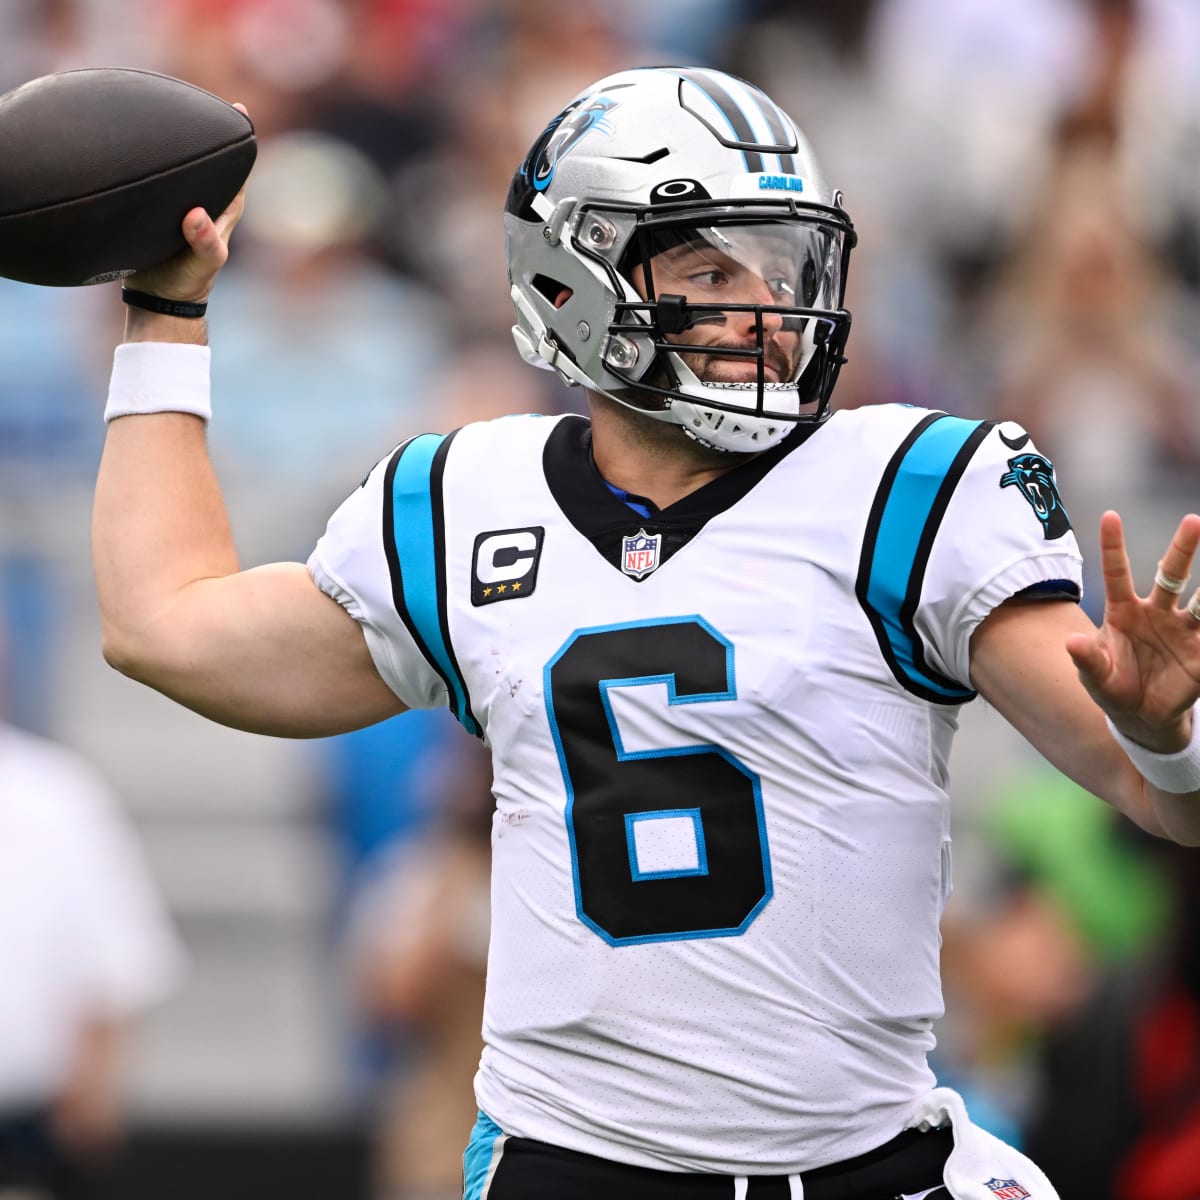 Football Fans Are Loving Panthers New Uniforms - The Spun: What's